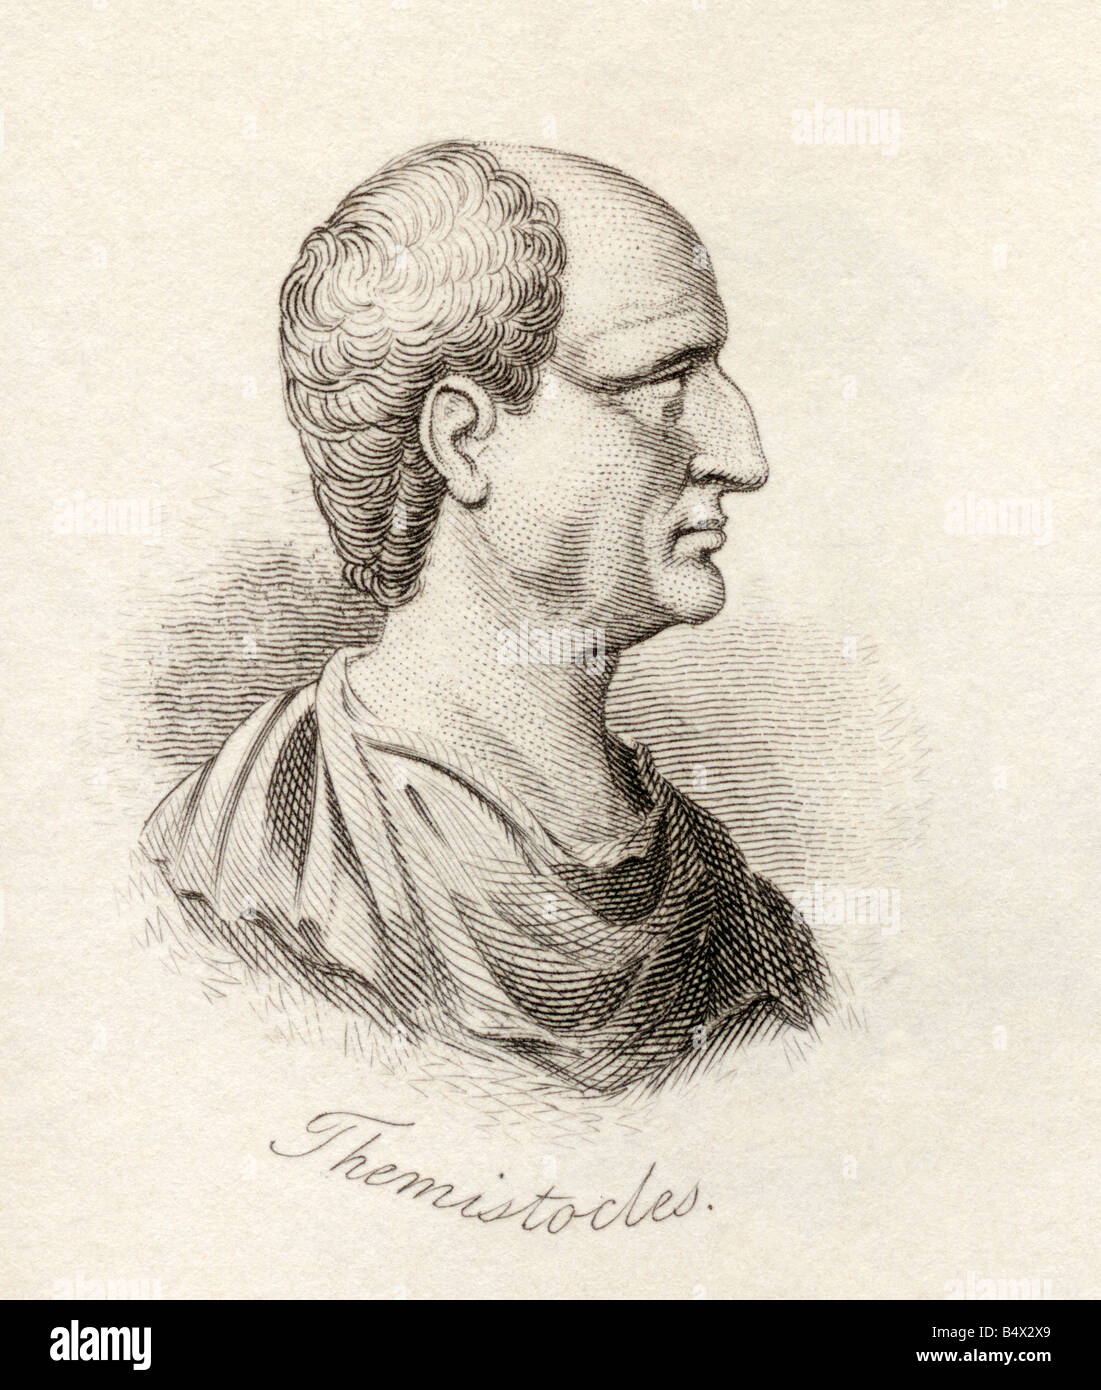 Themistocles, c. 524 to 459 BC. Athenian soldier and statesman. From the book Crabbs Historical Dictionary, published 1825. Stock Photo